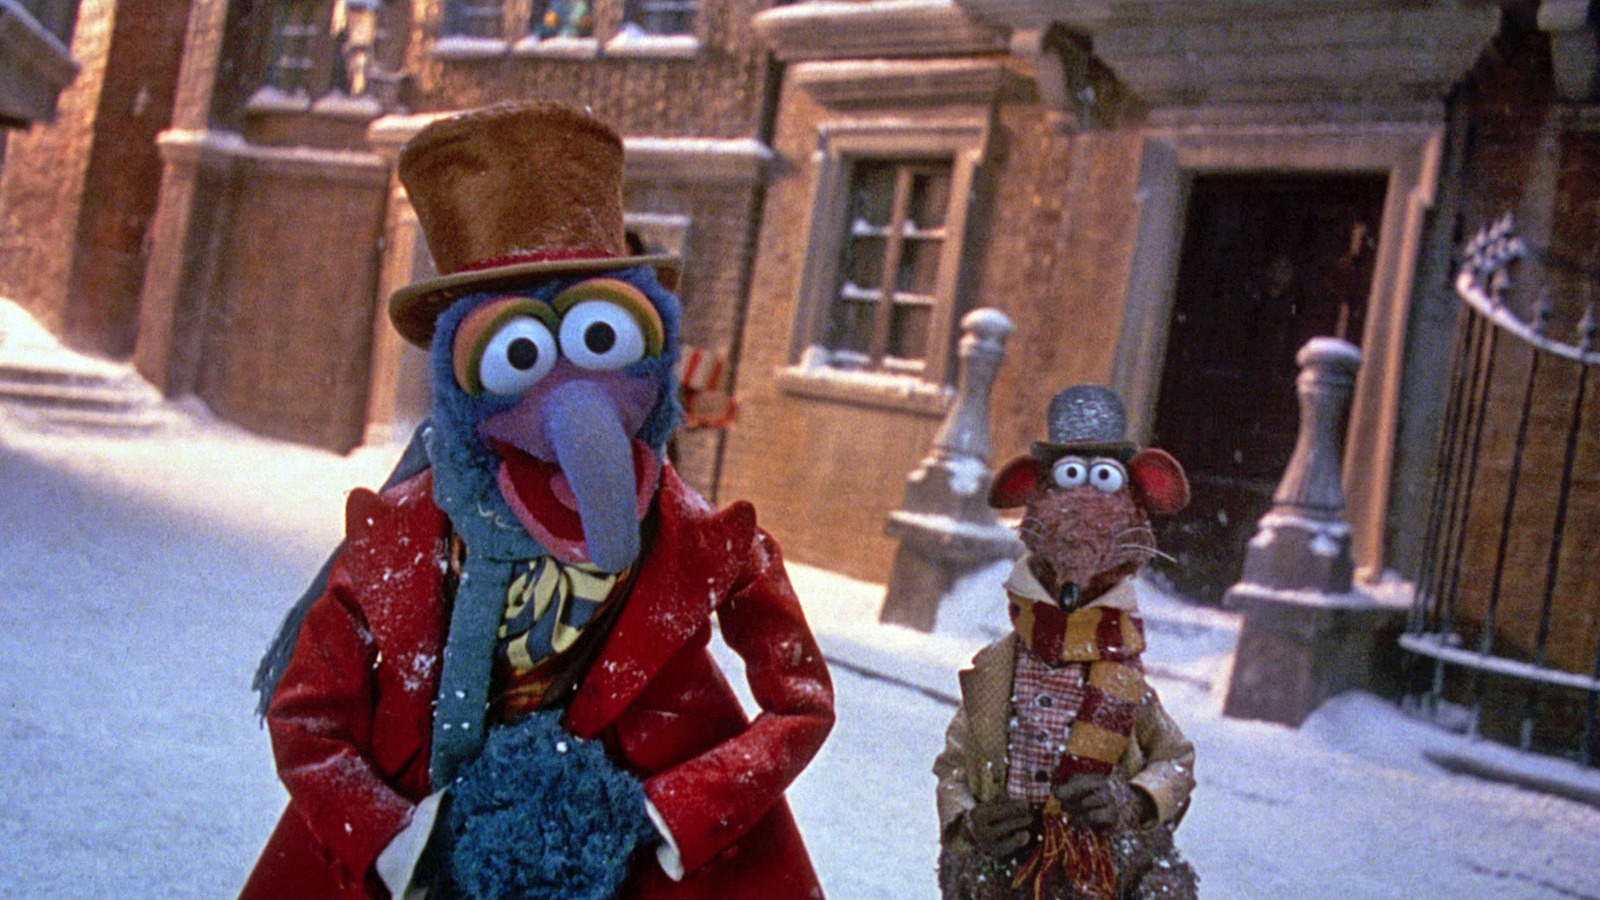 The Muppet Christmas Carol almost featured a puppet version of Charles Dickens